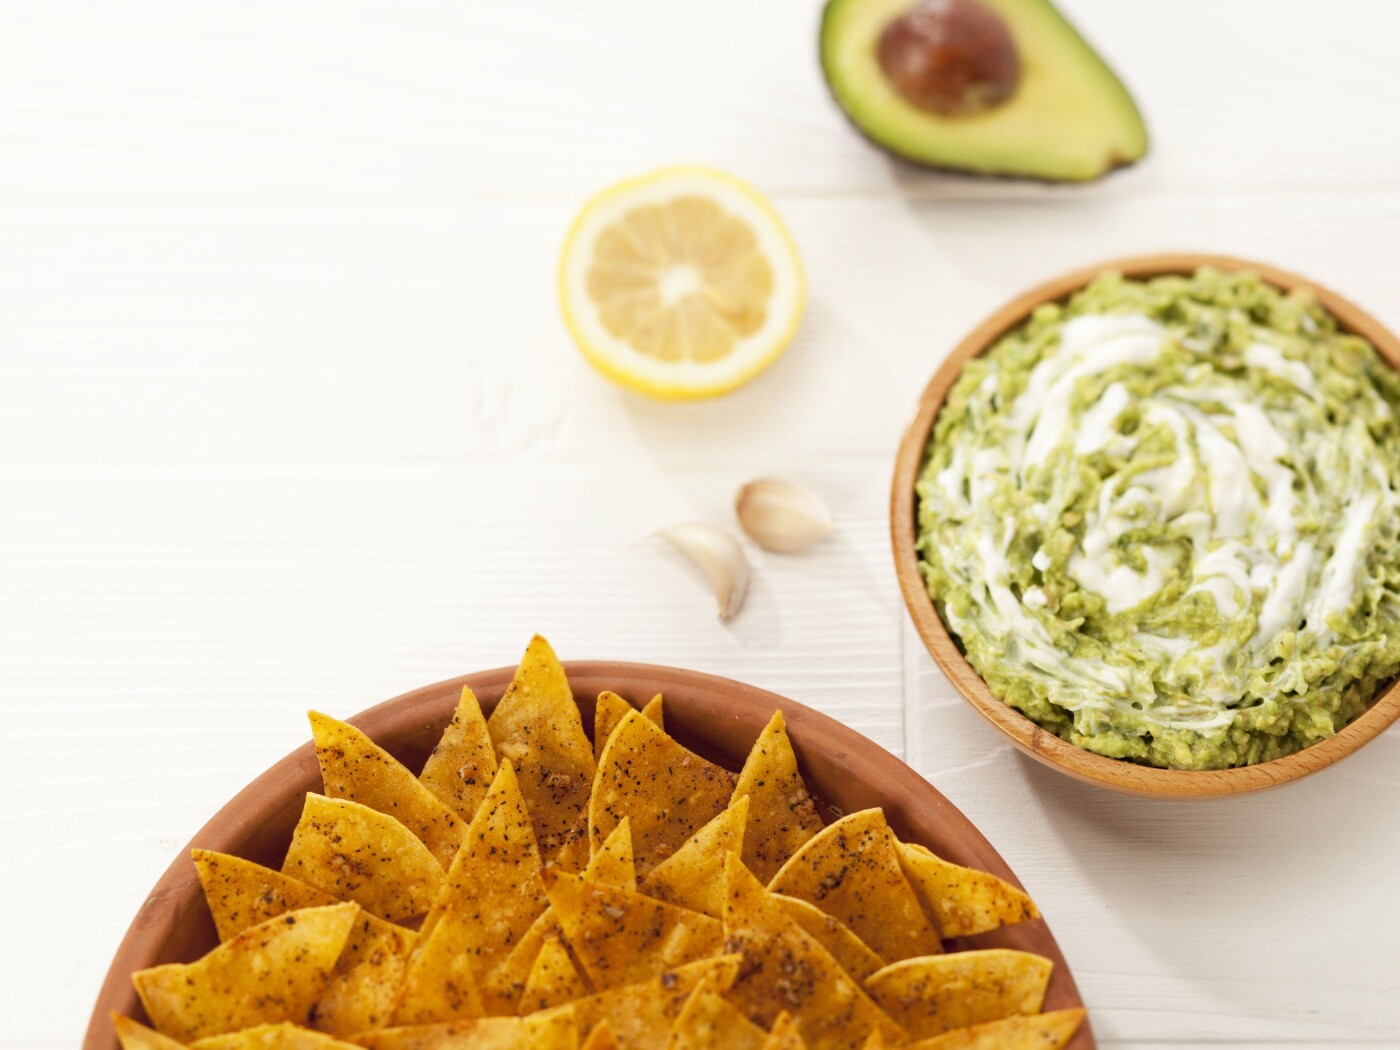 To continue a series of healthy cookbooks, this Creamy Guacamole with Baked Tortilla Chips - part of Healthy Family Recipes cookbook -  is a lower fat, lower sodium combination with a ton of essential fatty acids, calcium and magnesium.